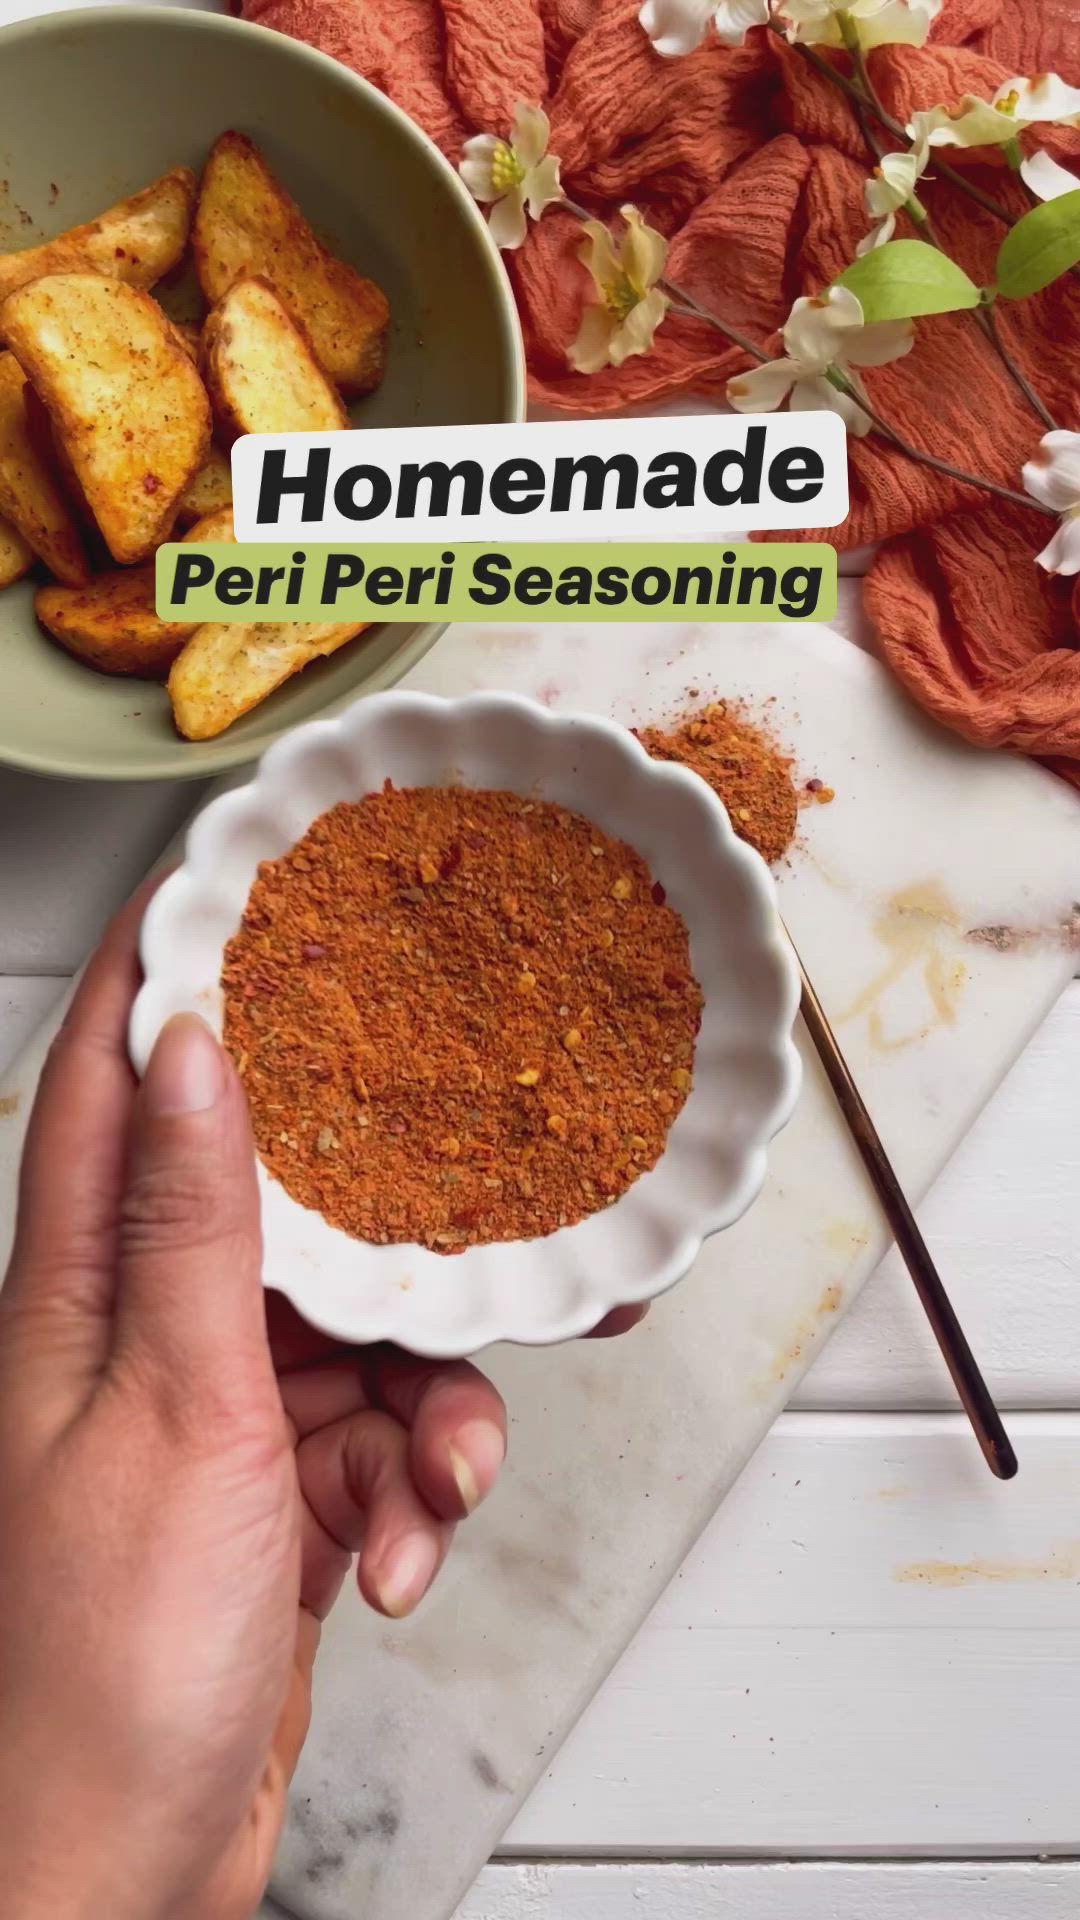 This may contain: someone is holding a bowl with some food in it and the words homemade peri peri seasoning